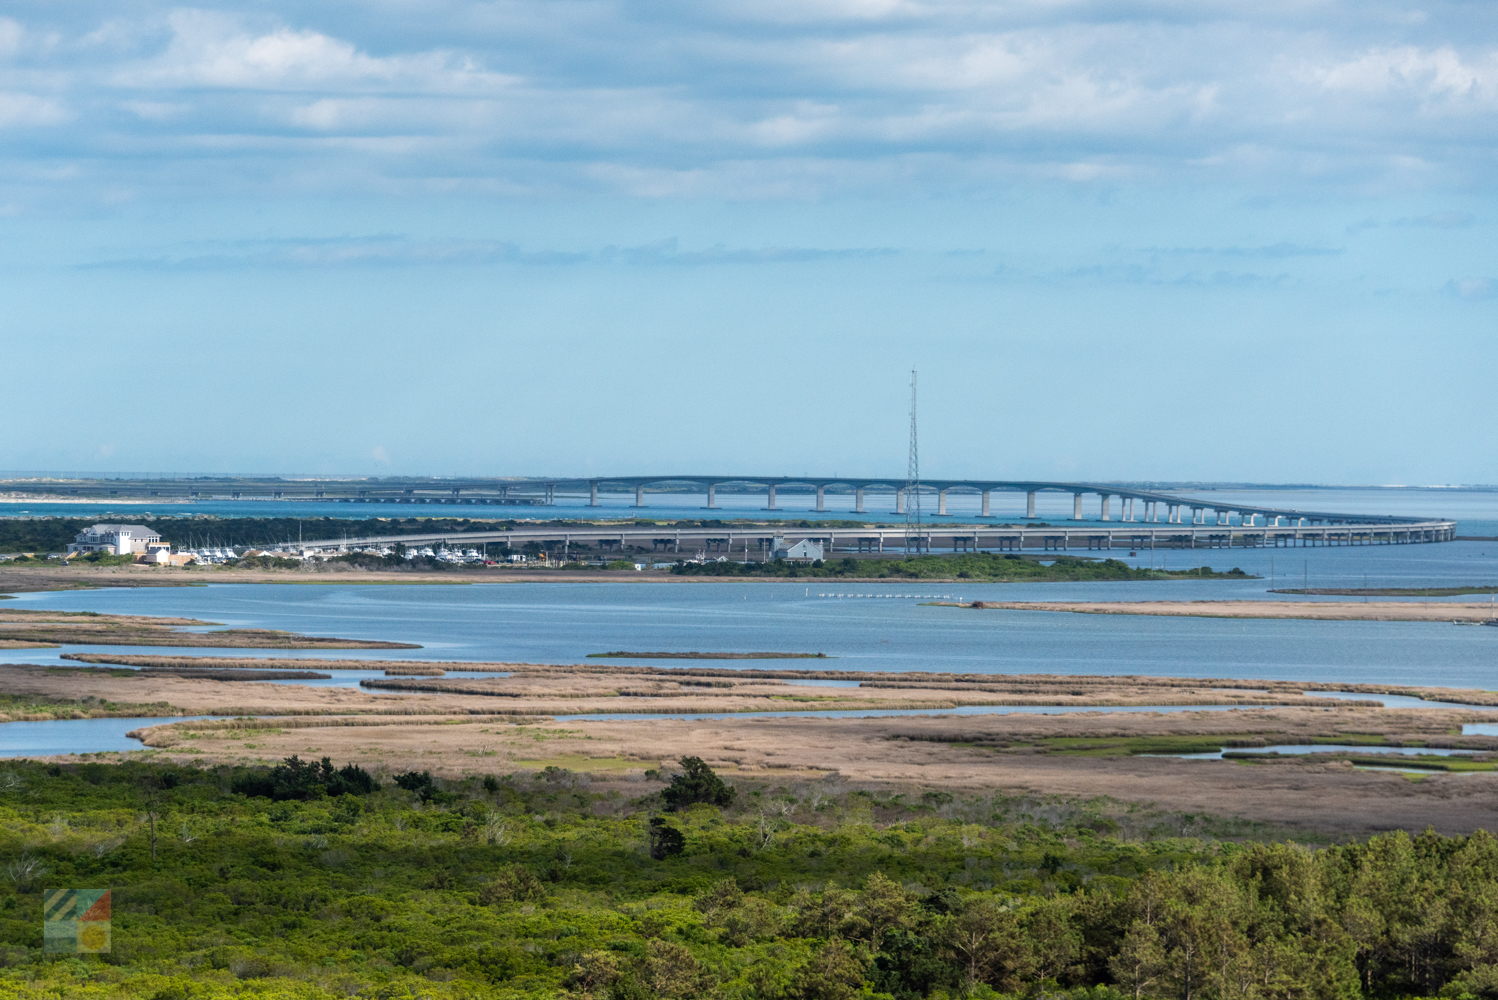 basnight Bridge from the top of Bodie Island Lighthouse